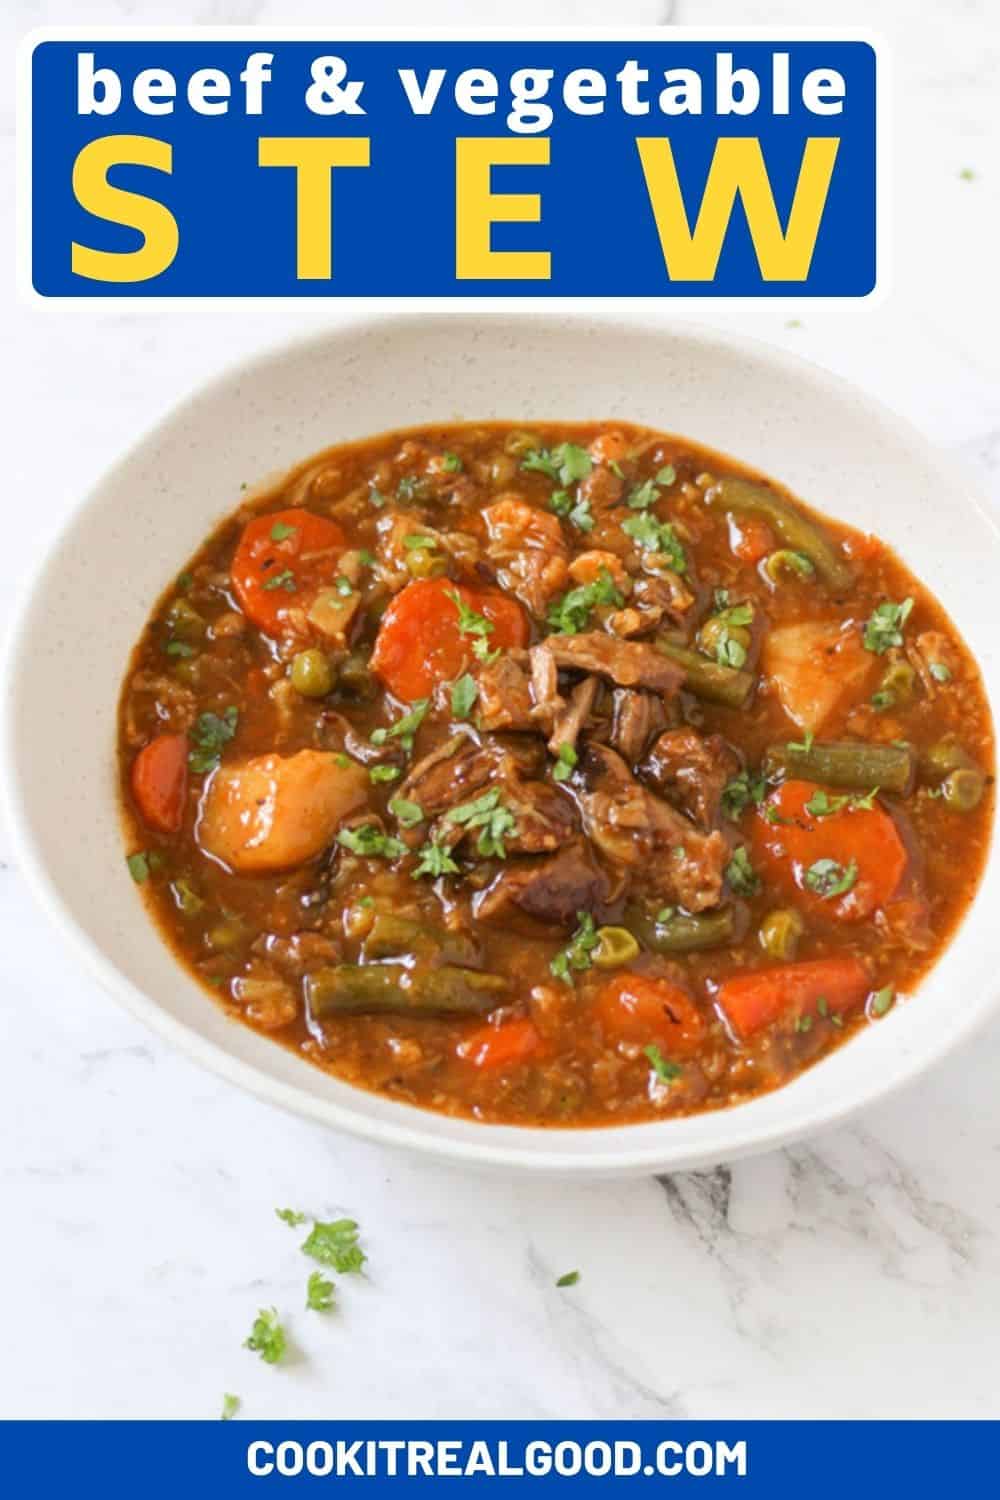 Beef and Vegetable Stew Recipe | Cook It Real Good